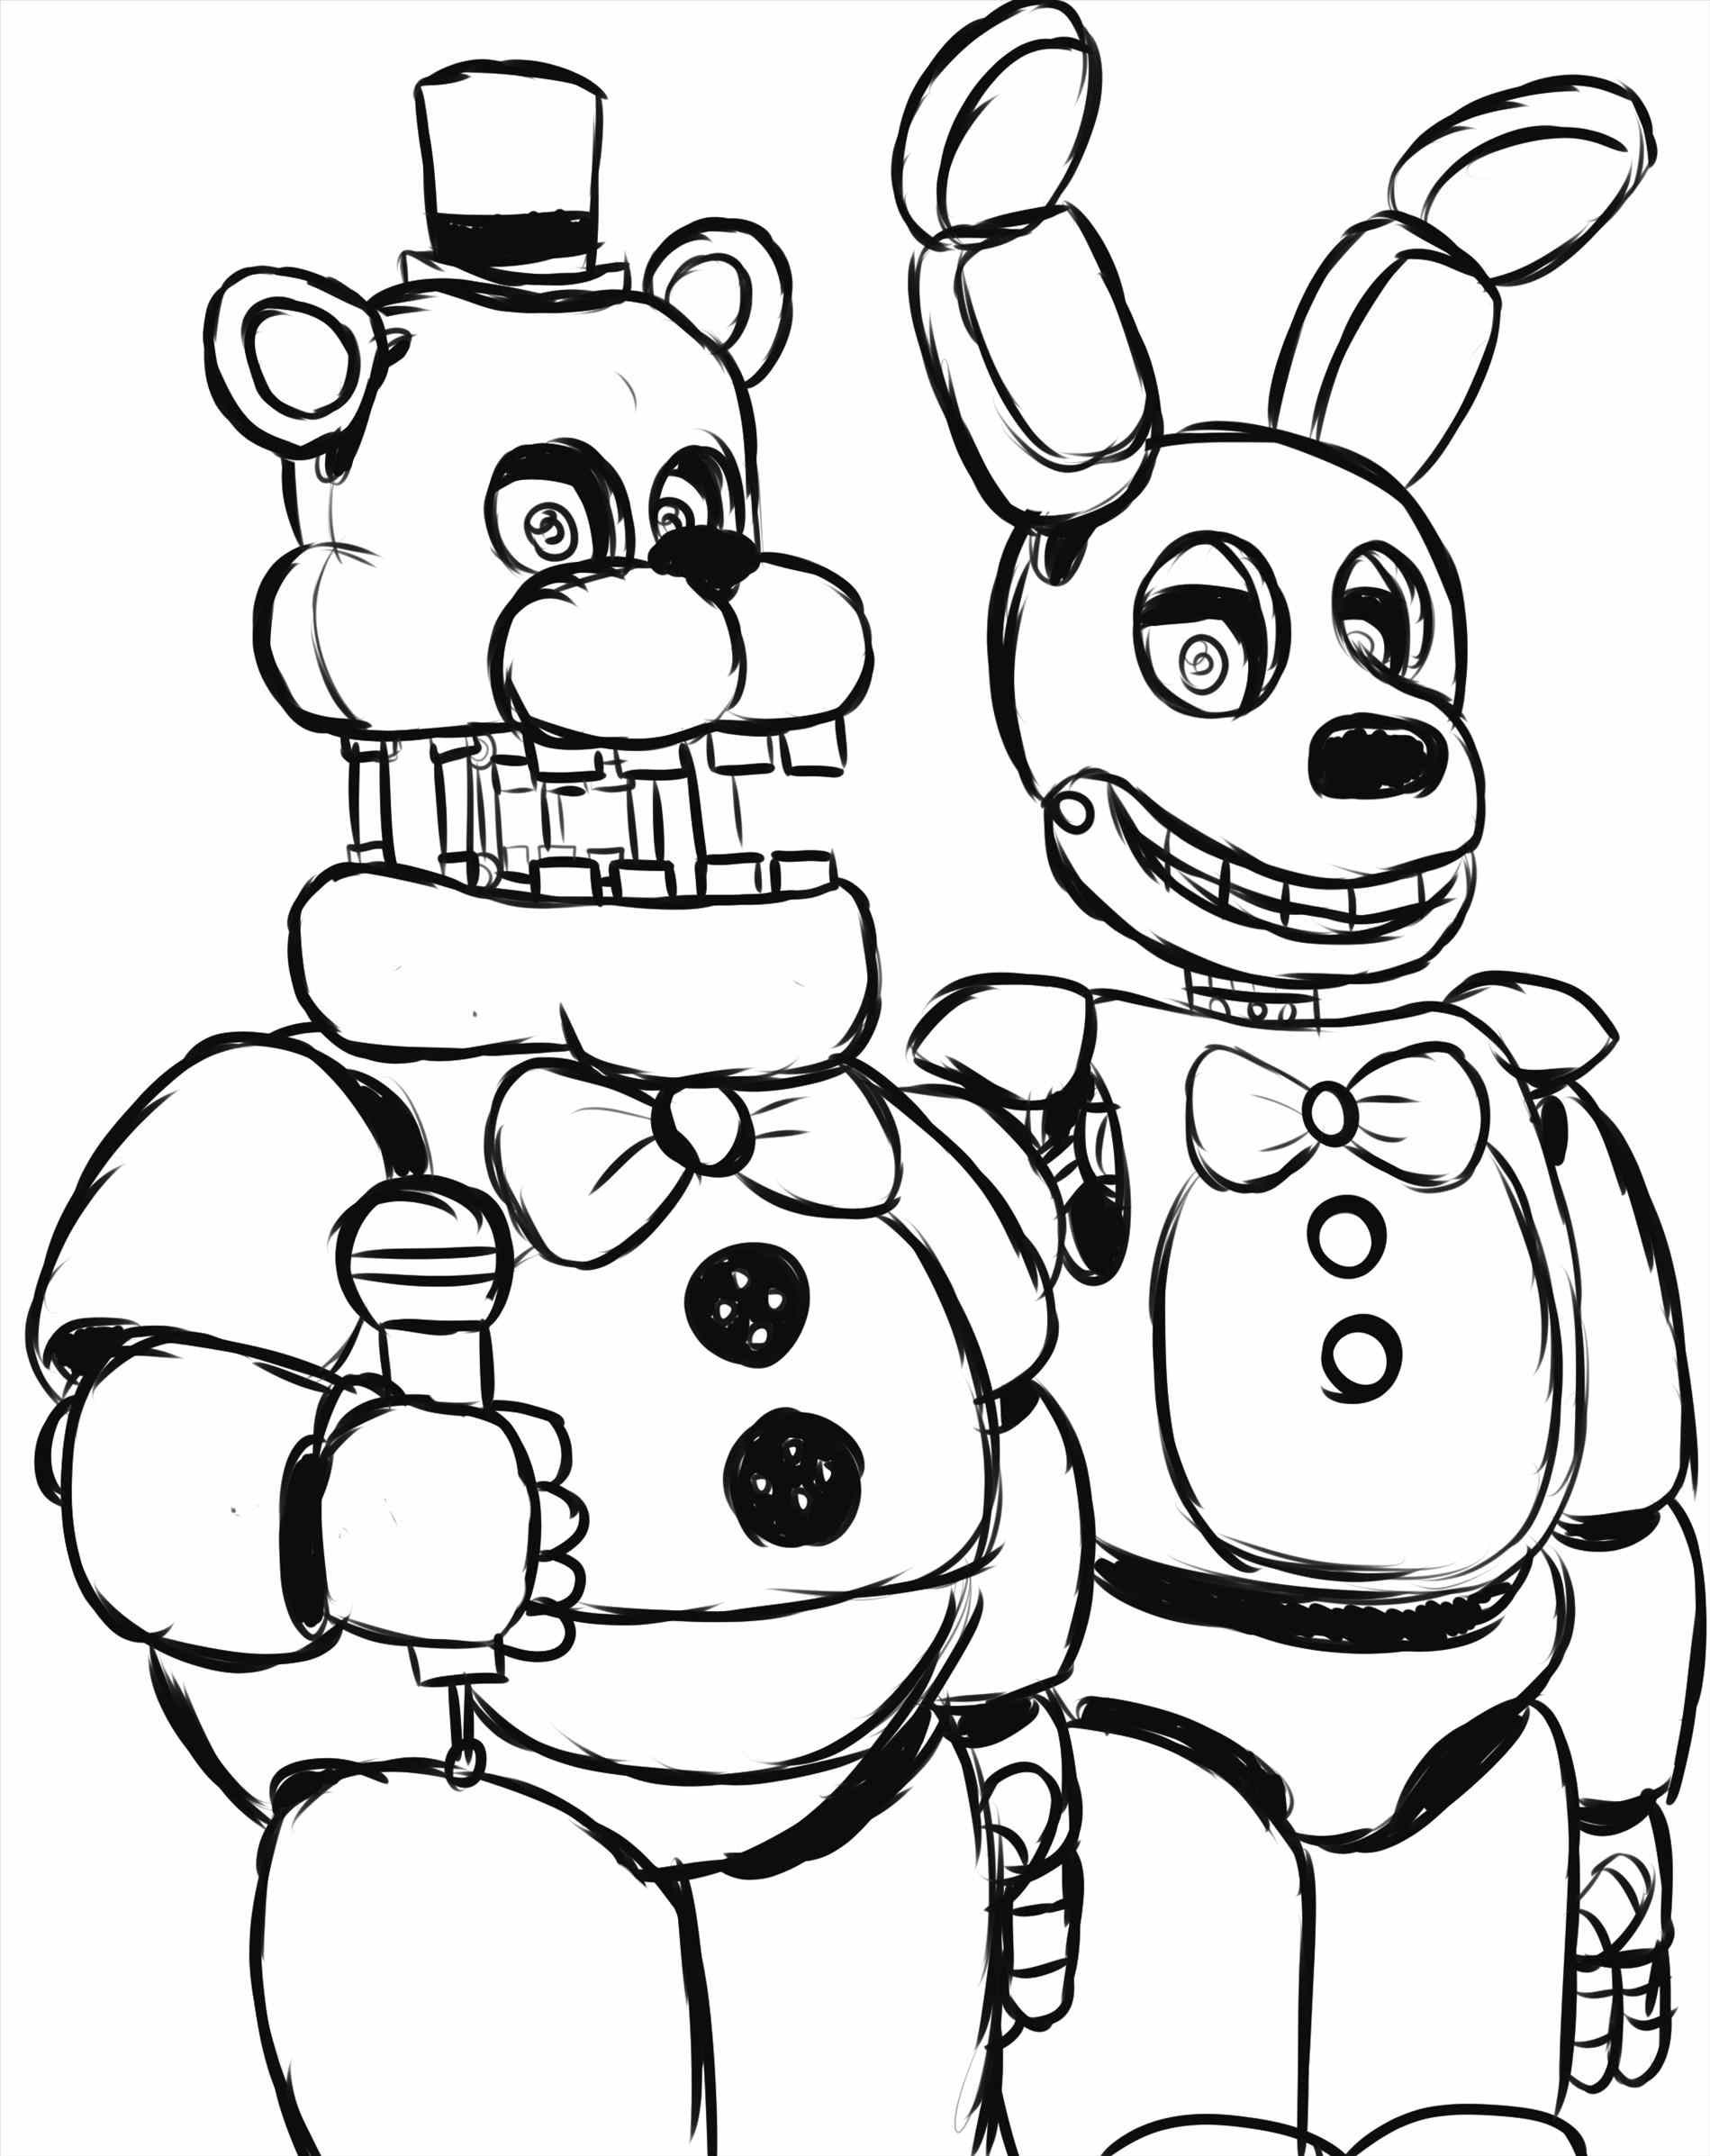 Toy Bonnie Coloring Page at GetColorings.com | Free ...